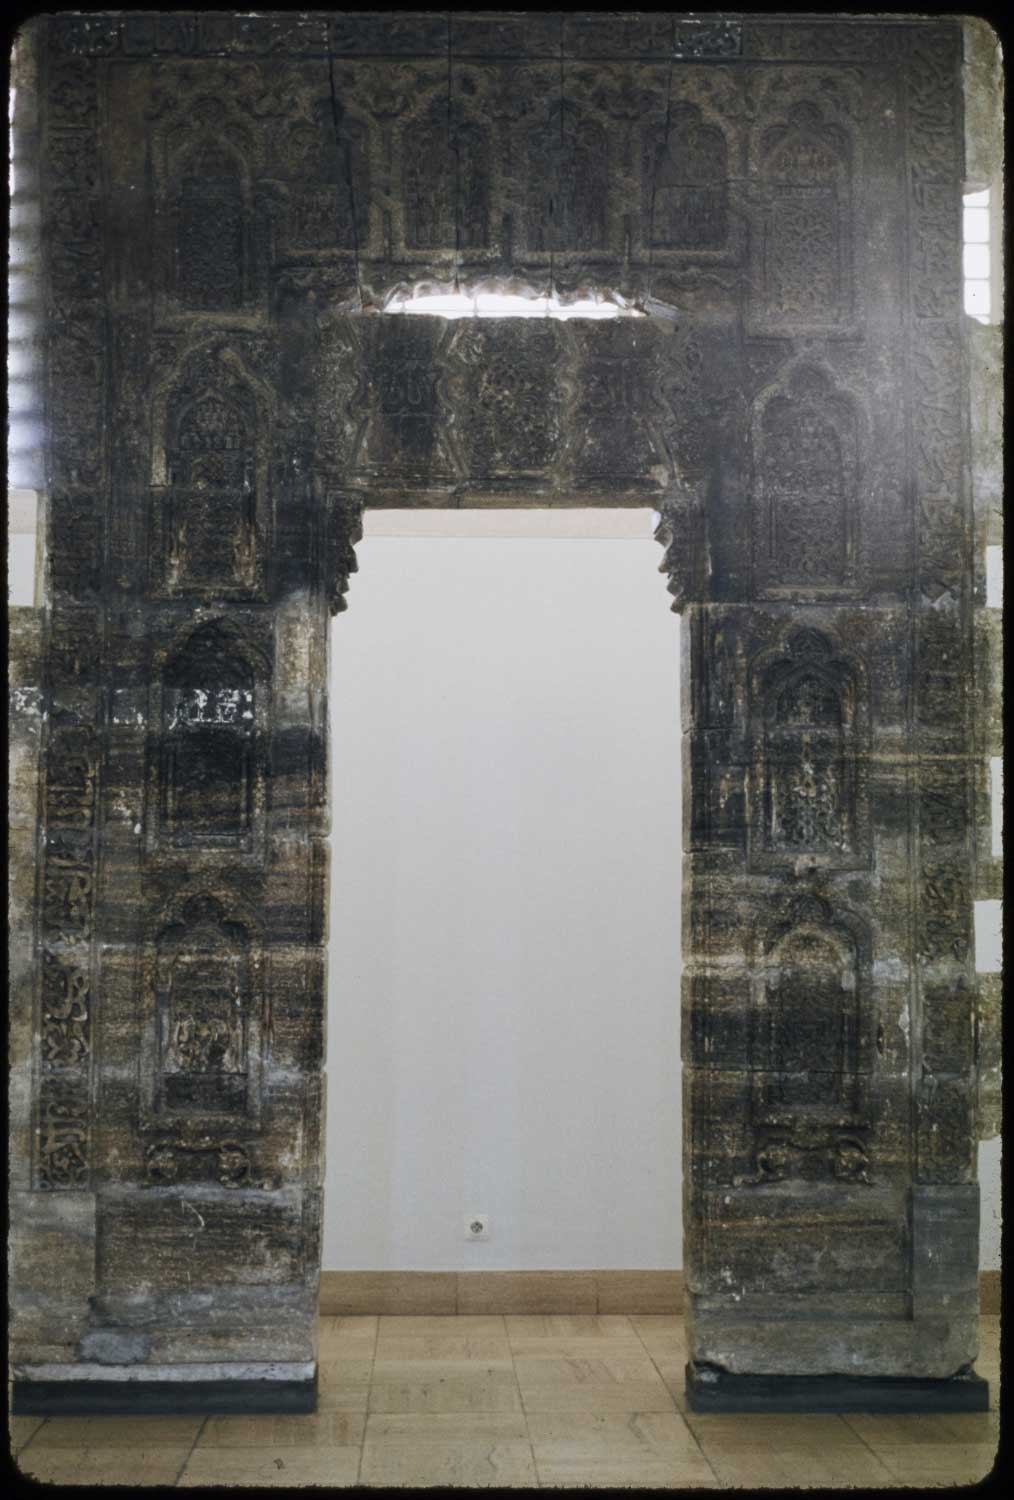 Stone portal to the mausoleum of Imam al-Bahir, dated 1239-1259, displayed in Baghdad Museum.